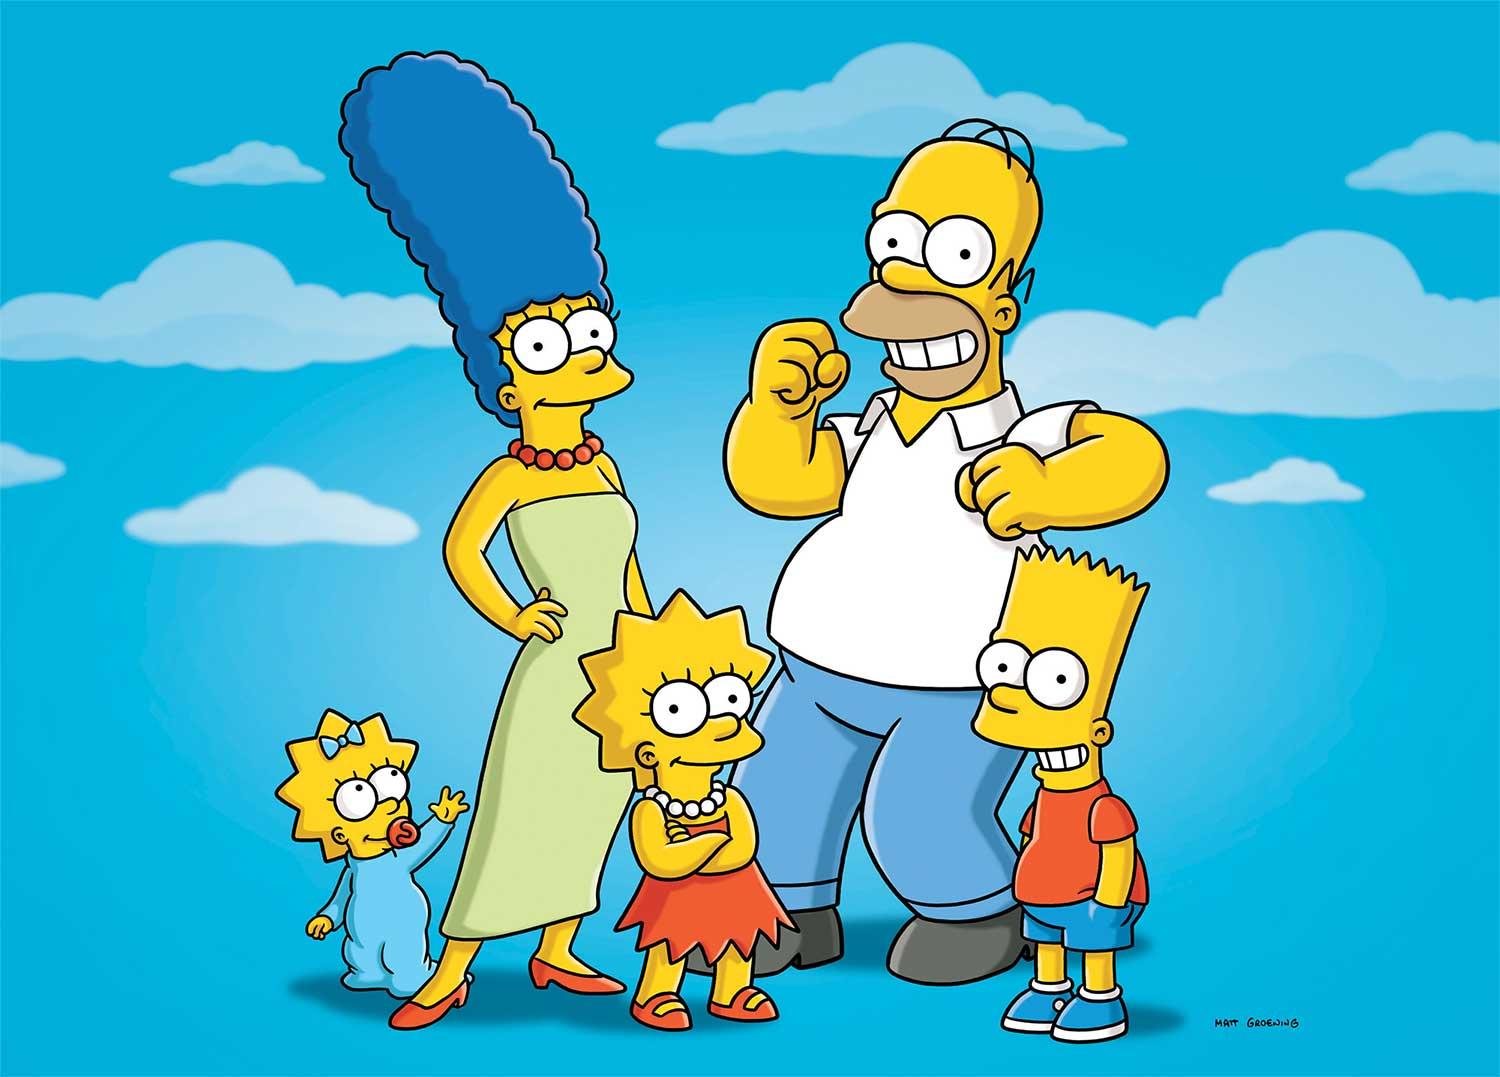 ”The Simpsons”.